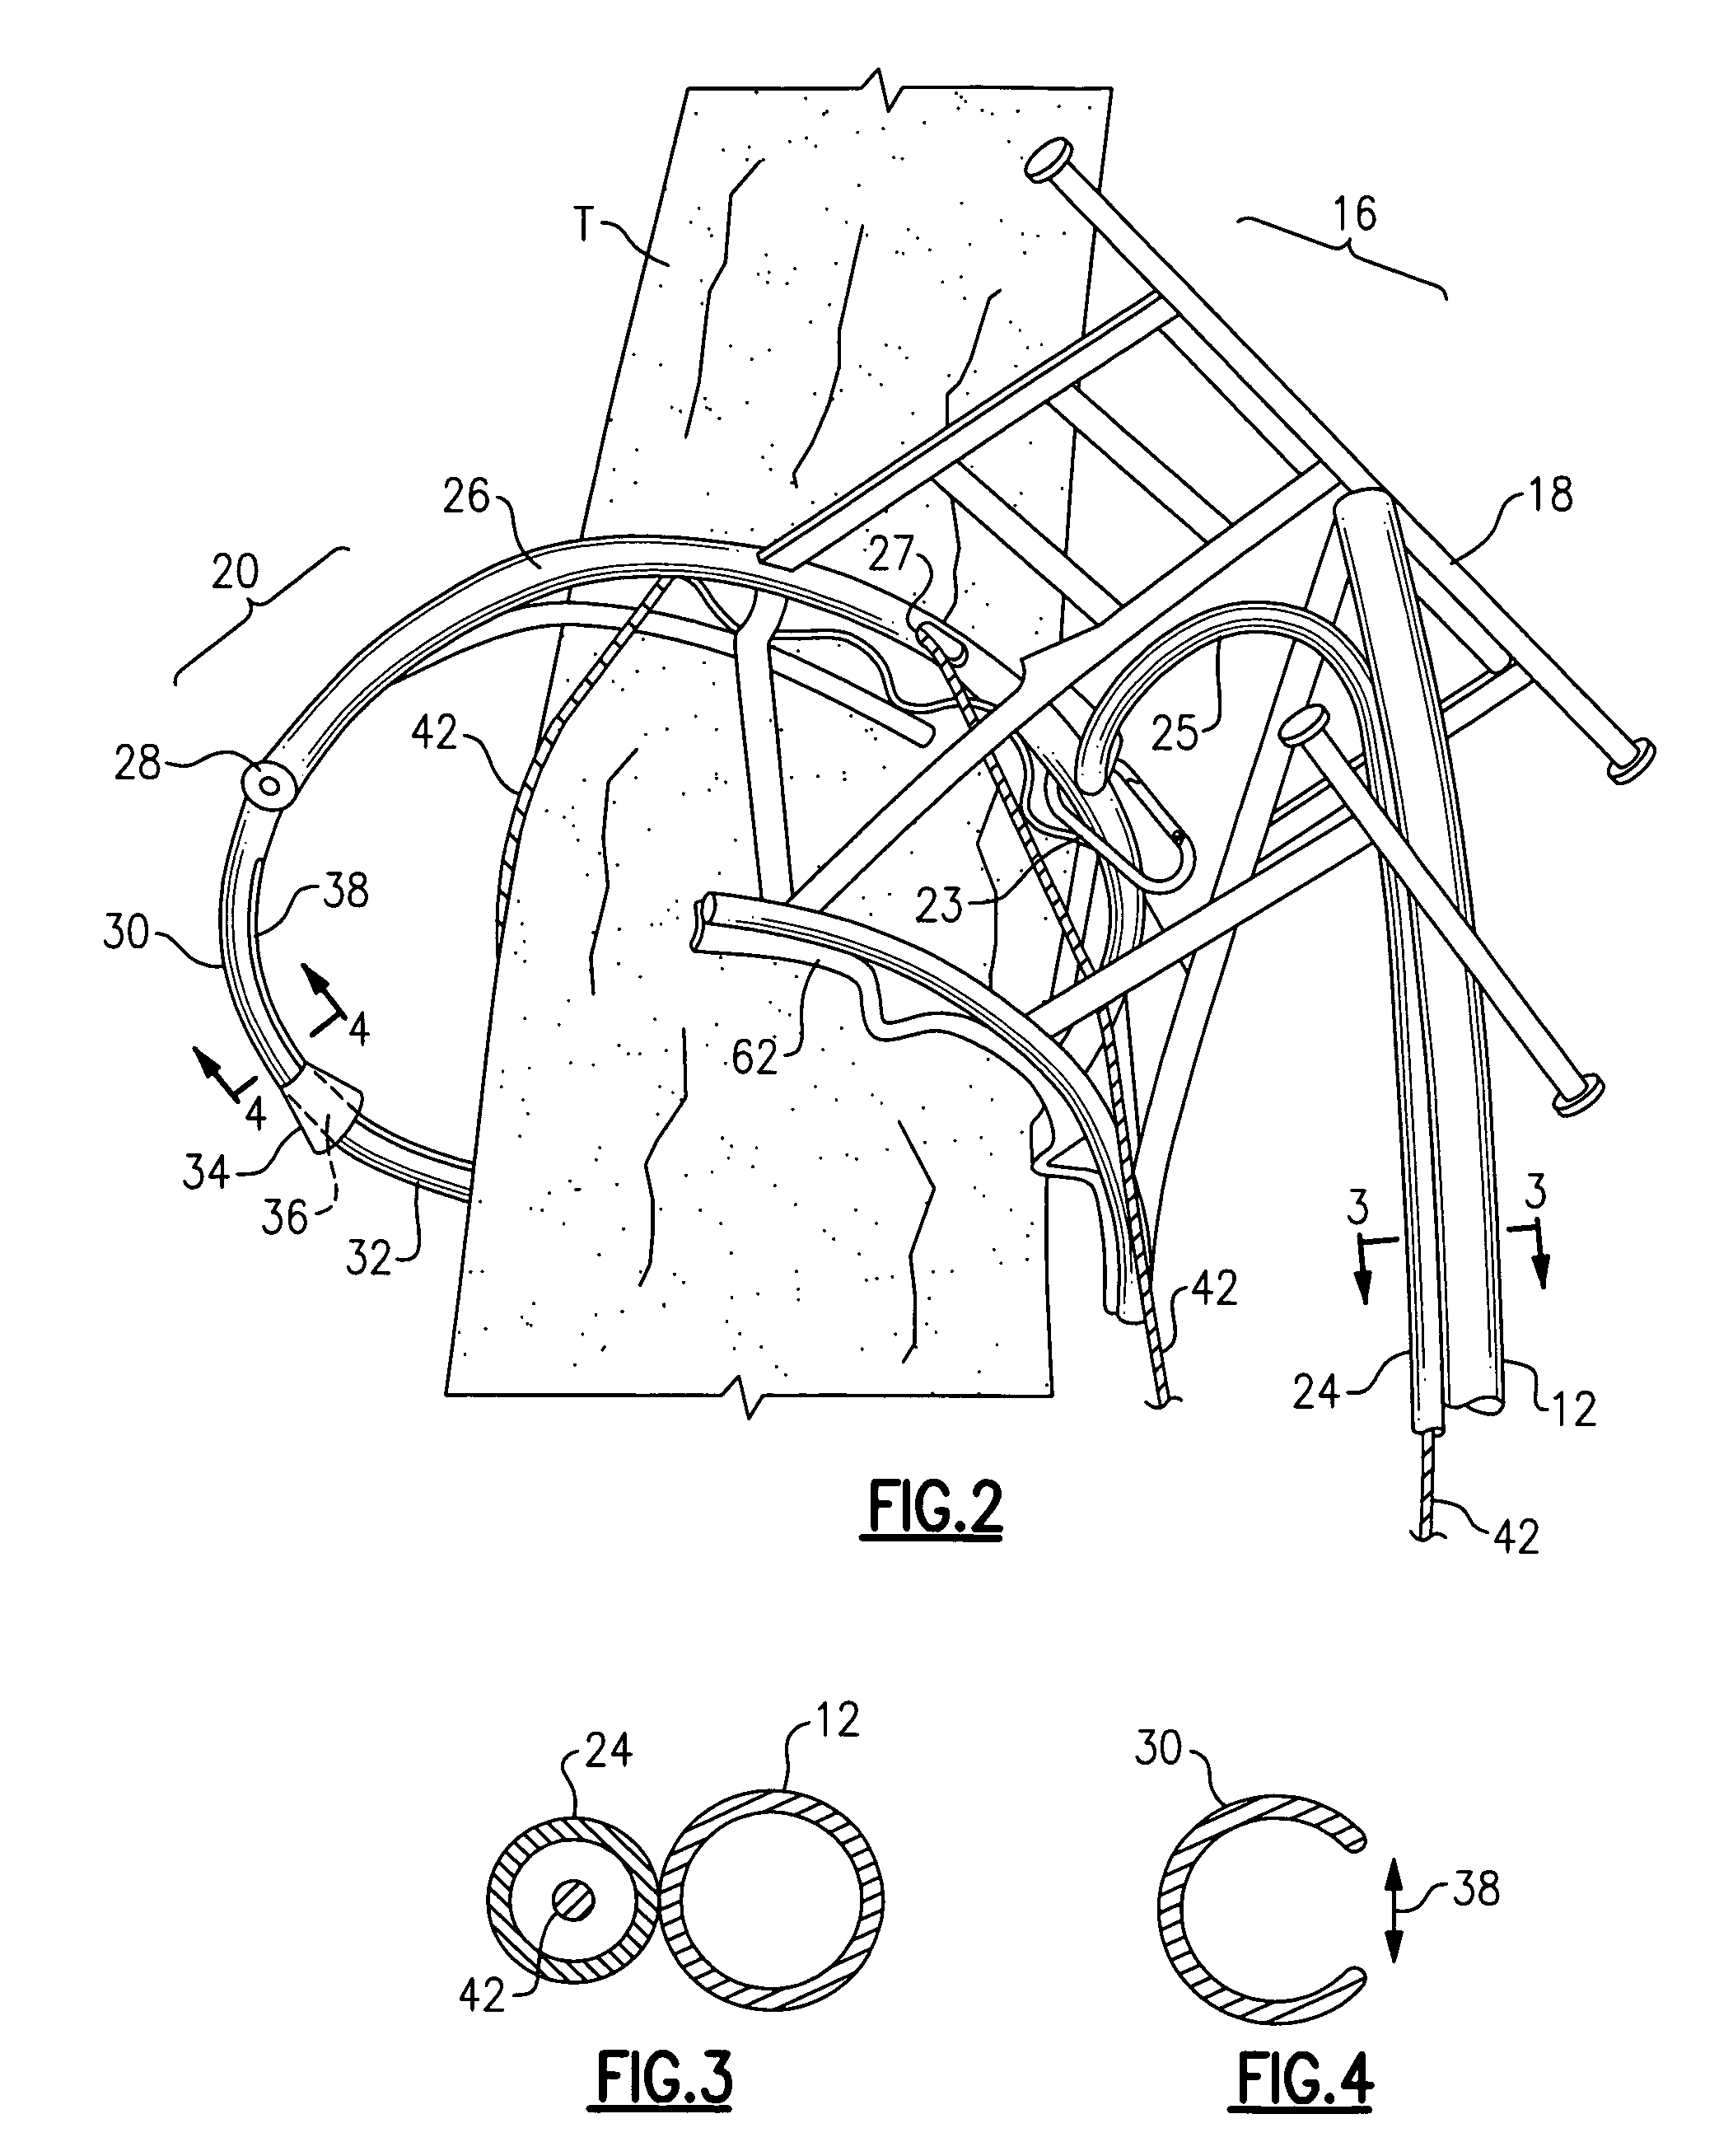 Suspended anchored climbing device with safety features